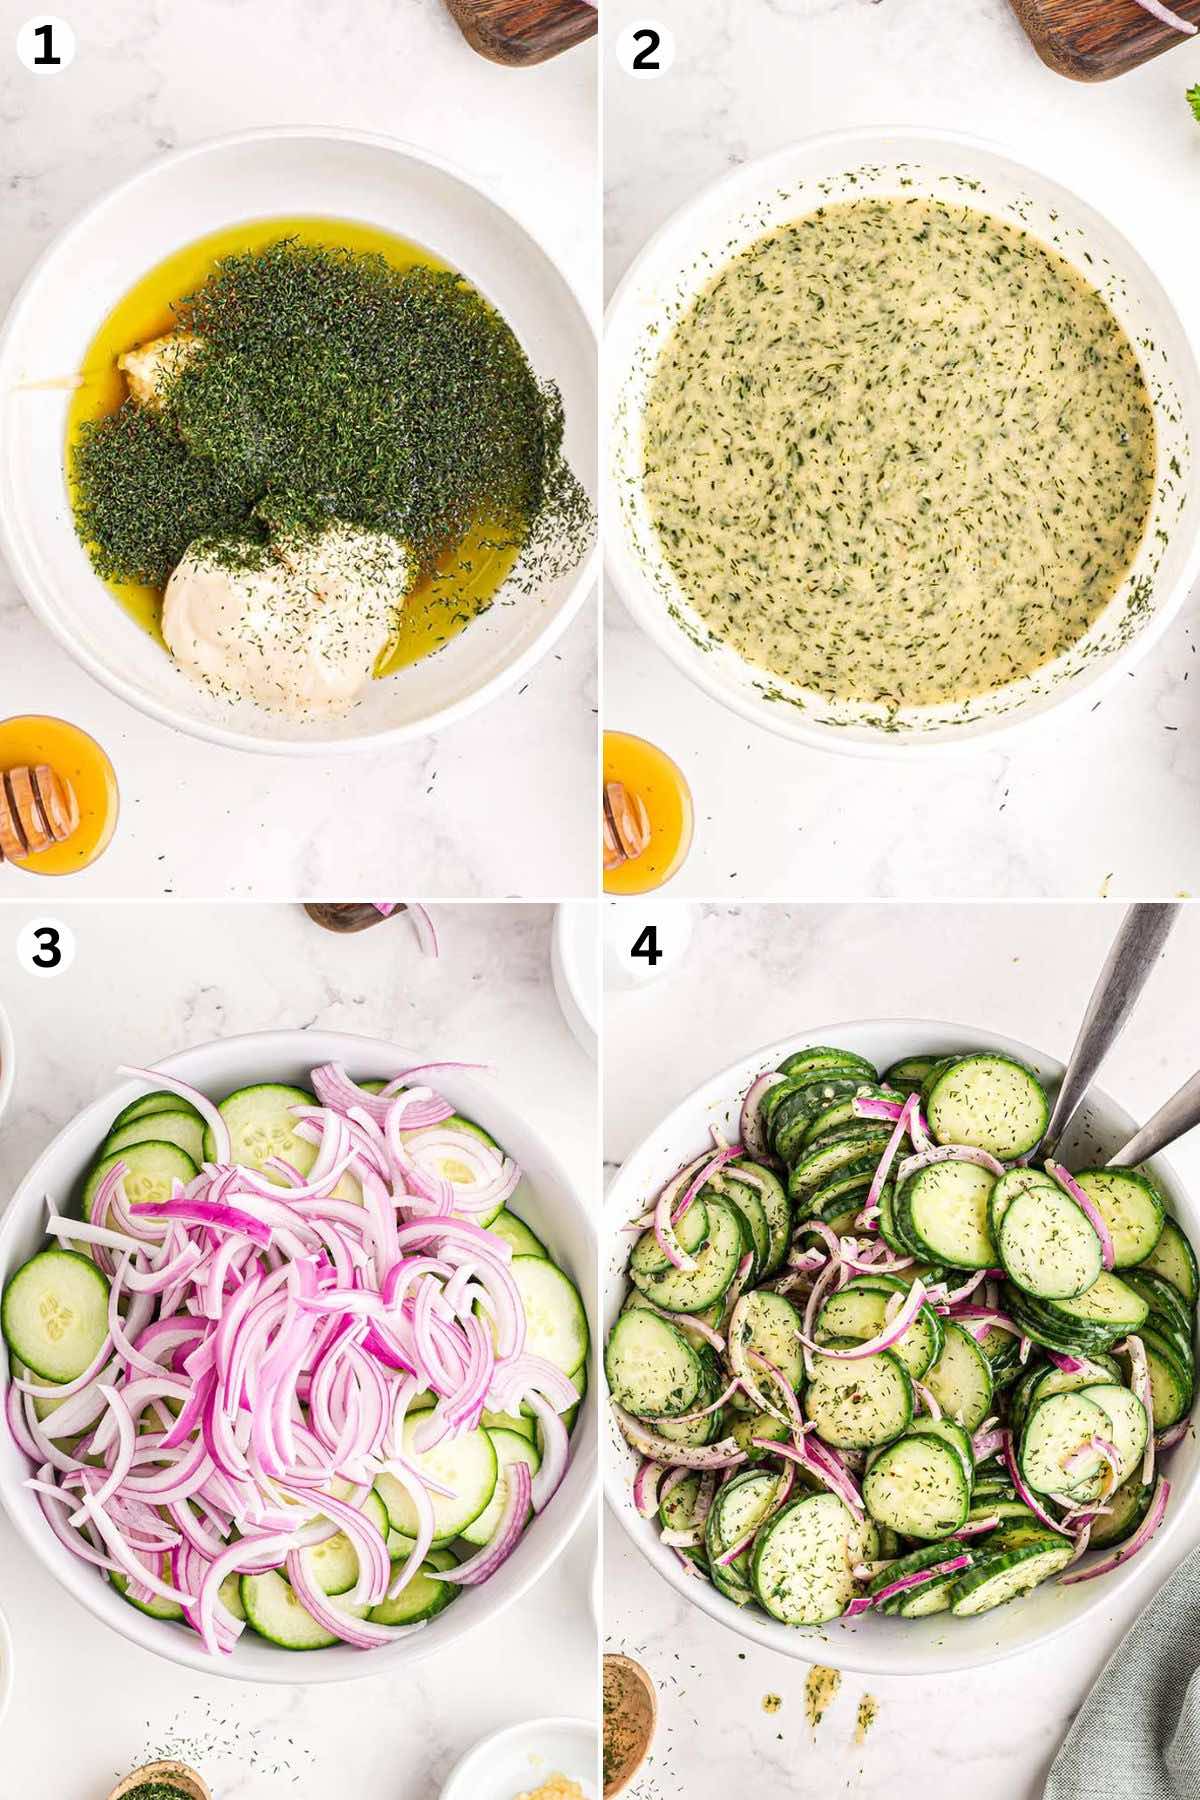 mix the dressing in a bowl. place cucumber and onion on another bowl. mix cucumber and the dressing. 